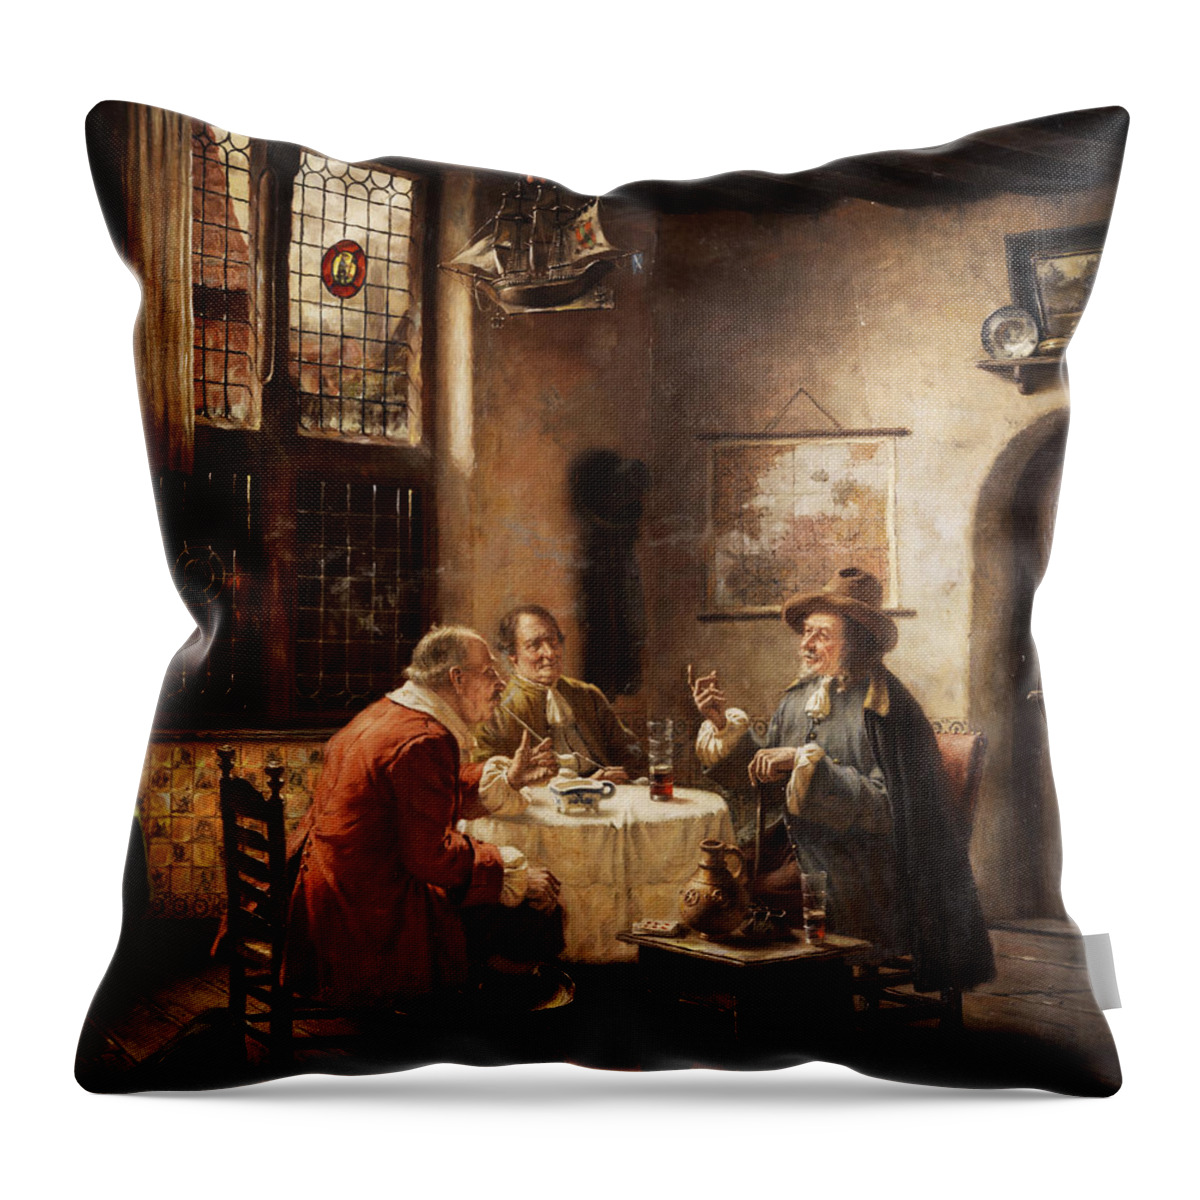 Merchants Throw Pillow featuring the painting Merchants by Fritz Wagner